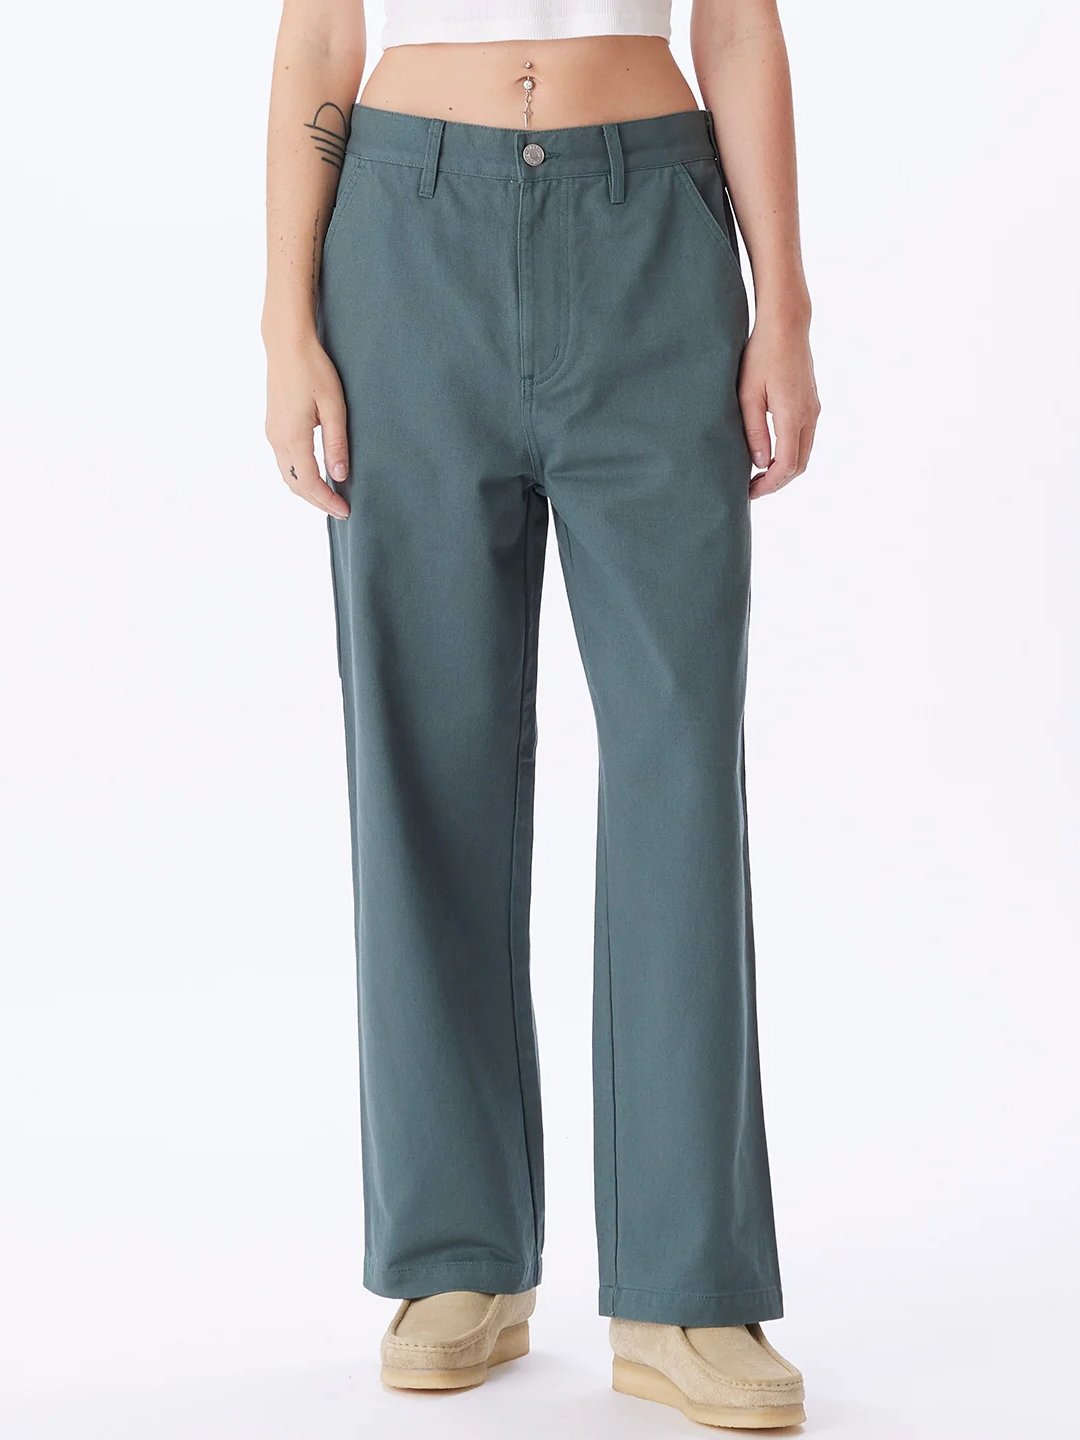 OBEY BRIGHTON CARPENTER PANT SILVER PINE FRONT